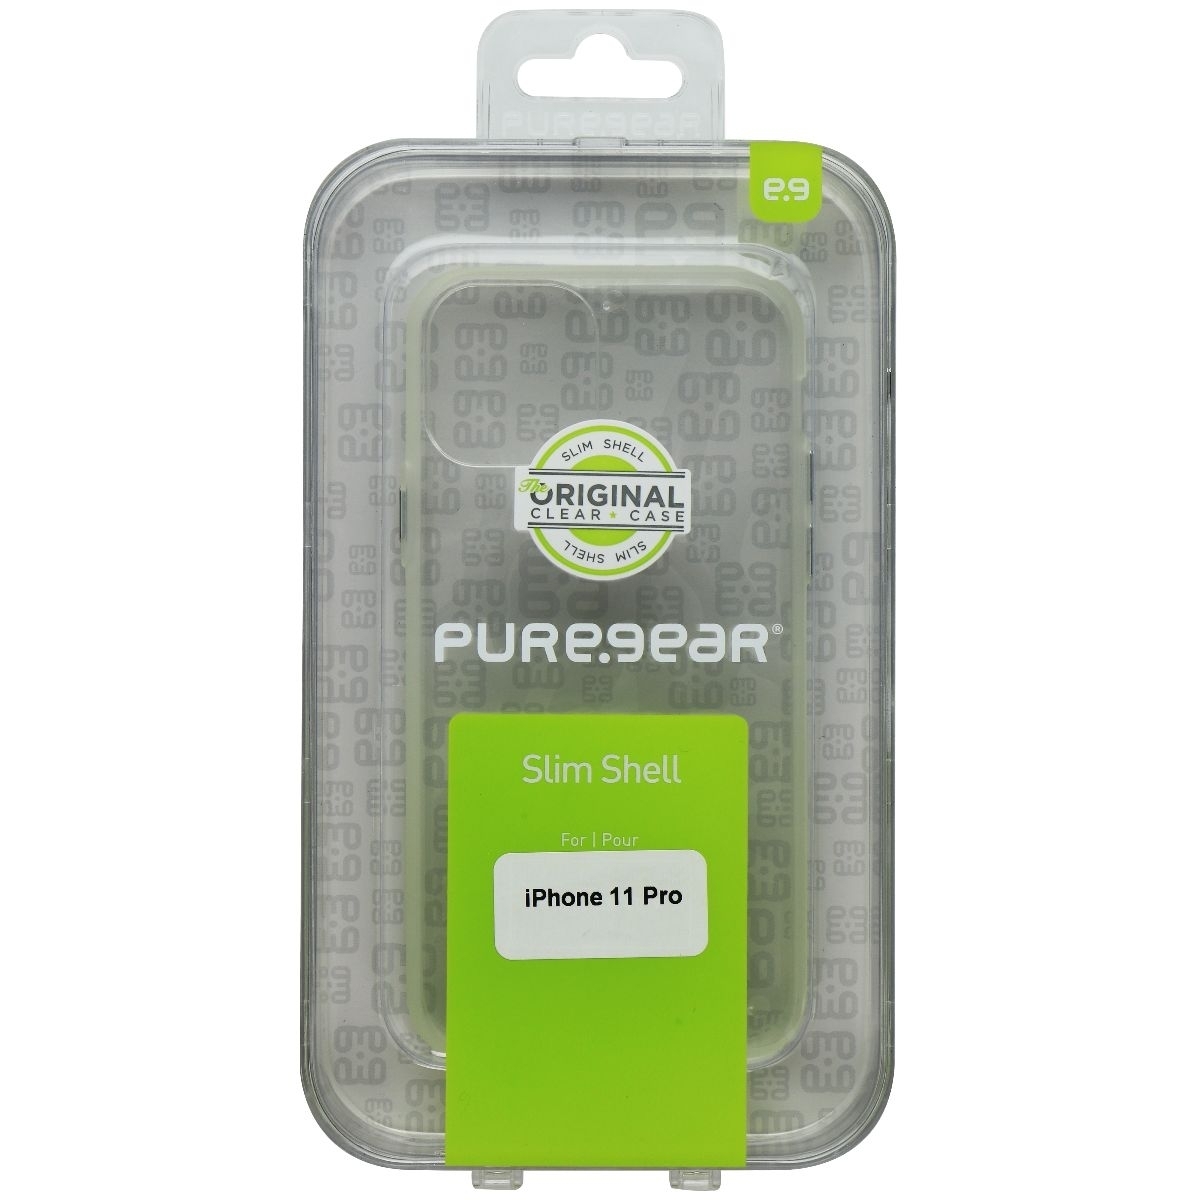 PureGear Slim Shell Series Case For Apple IPhone 11 Pro - Clear (Refurbished)